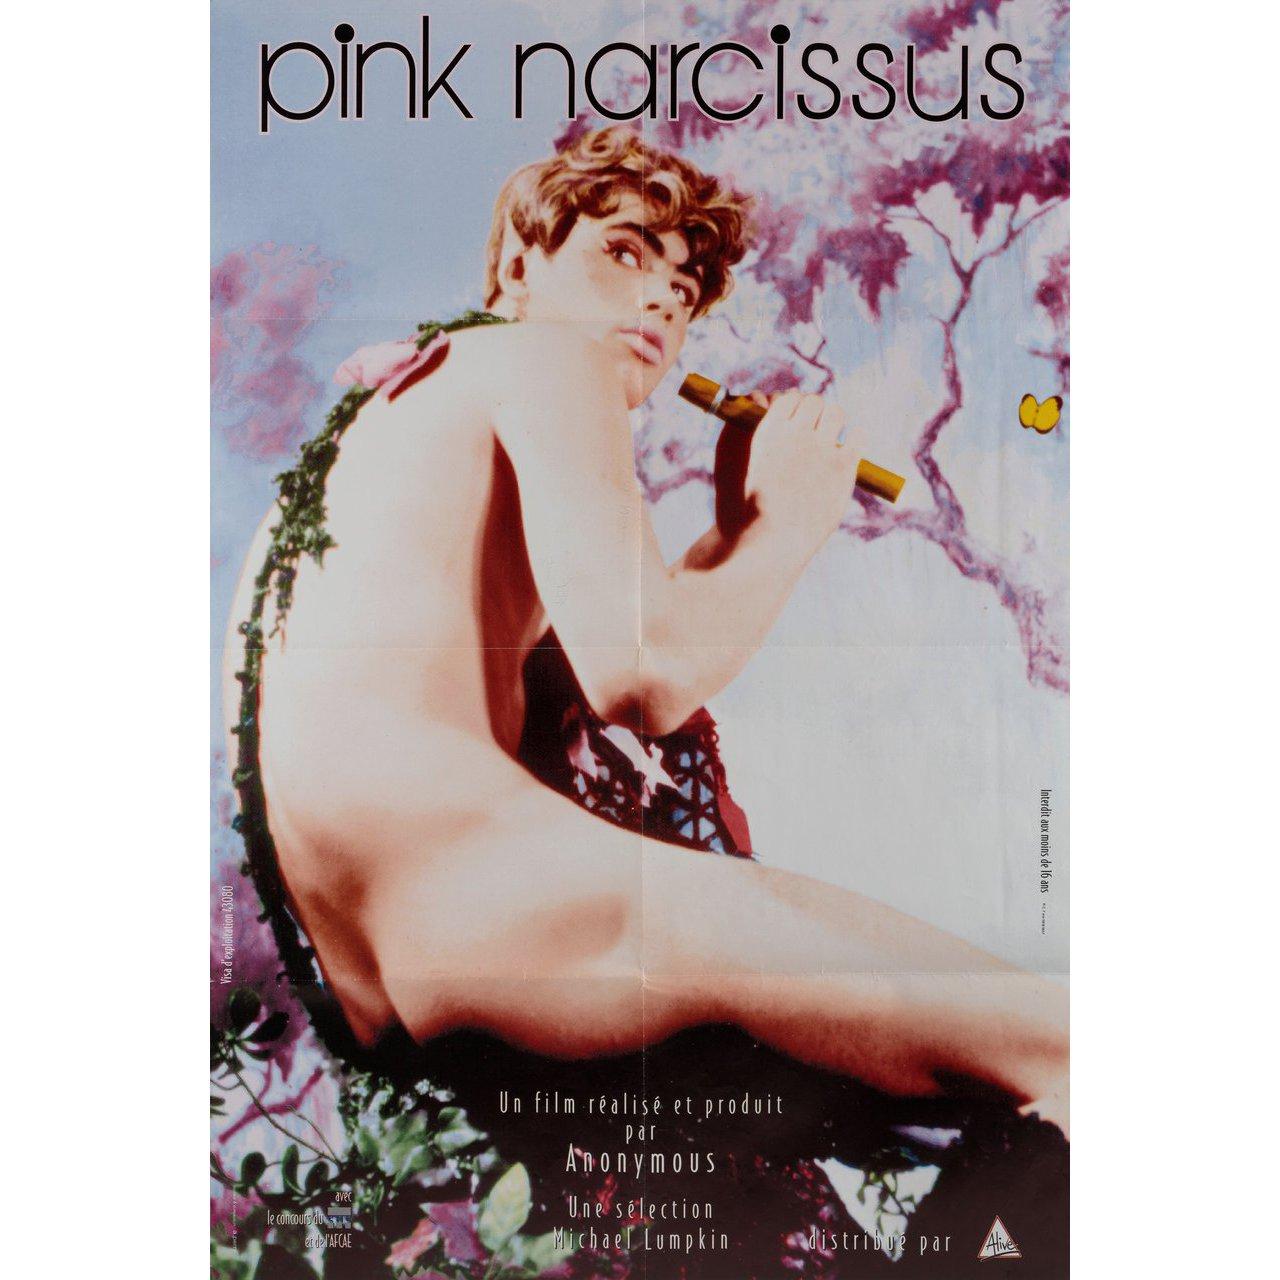 Original 1980s re-release French half grande poster for the 1971 film Pink Narcissus directed by James Bidgood with Don Brooks / Bobby Kendall. Very Good-Fine condition, folded. Many original posters were issued folded or were subsequently folded.